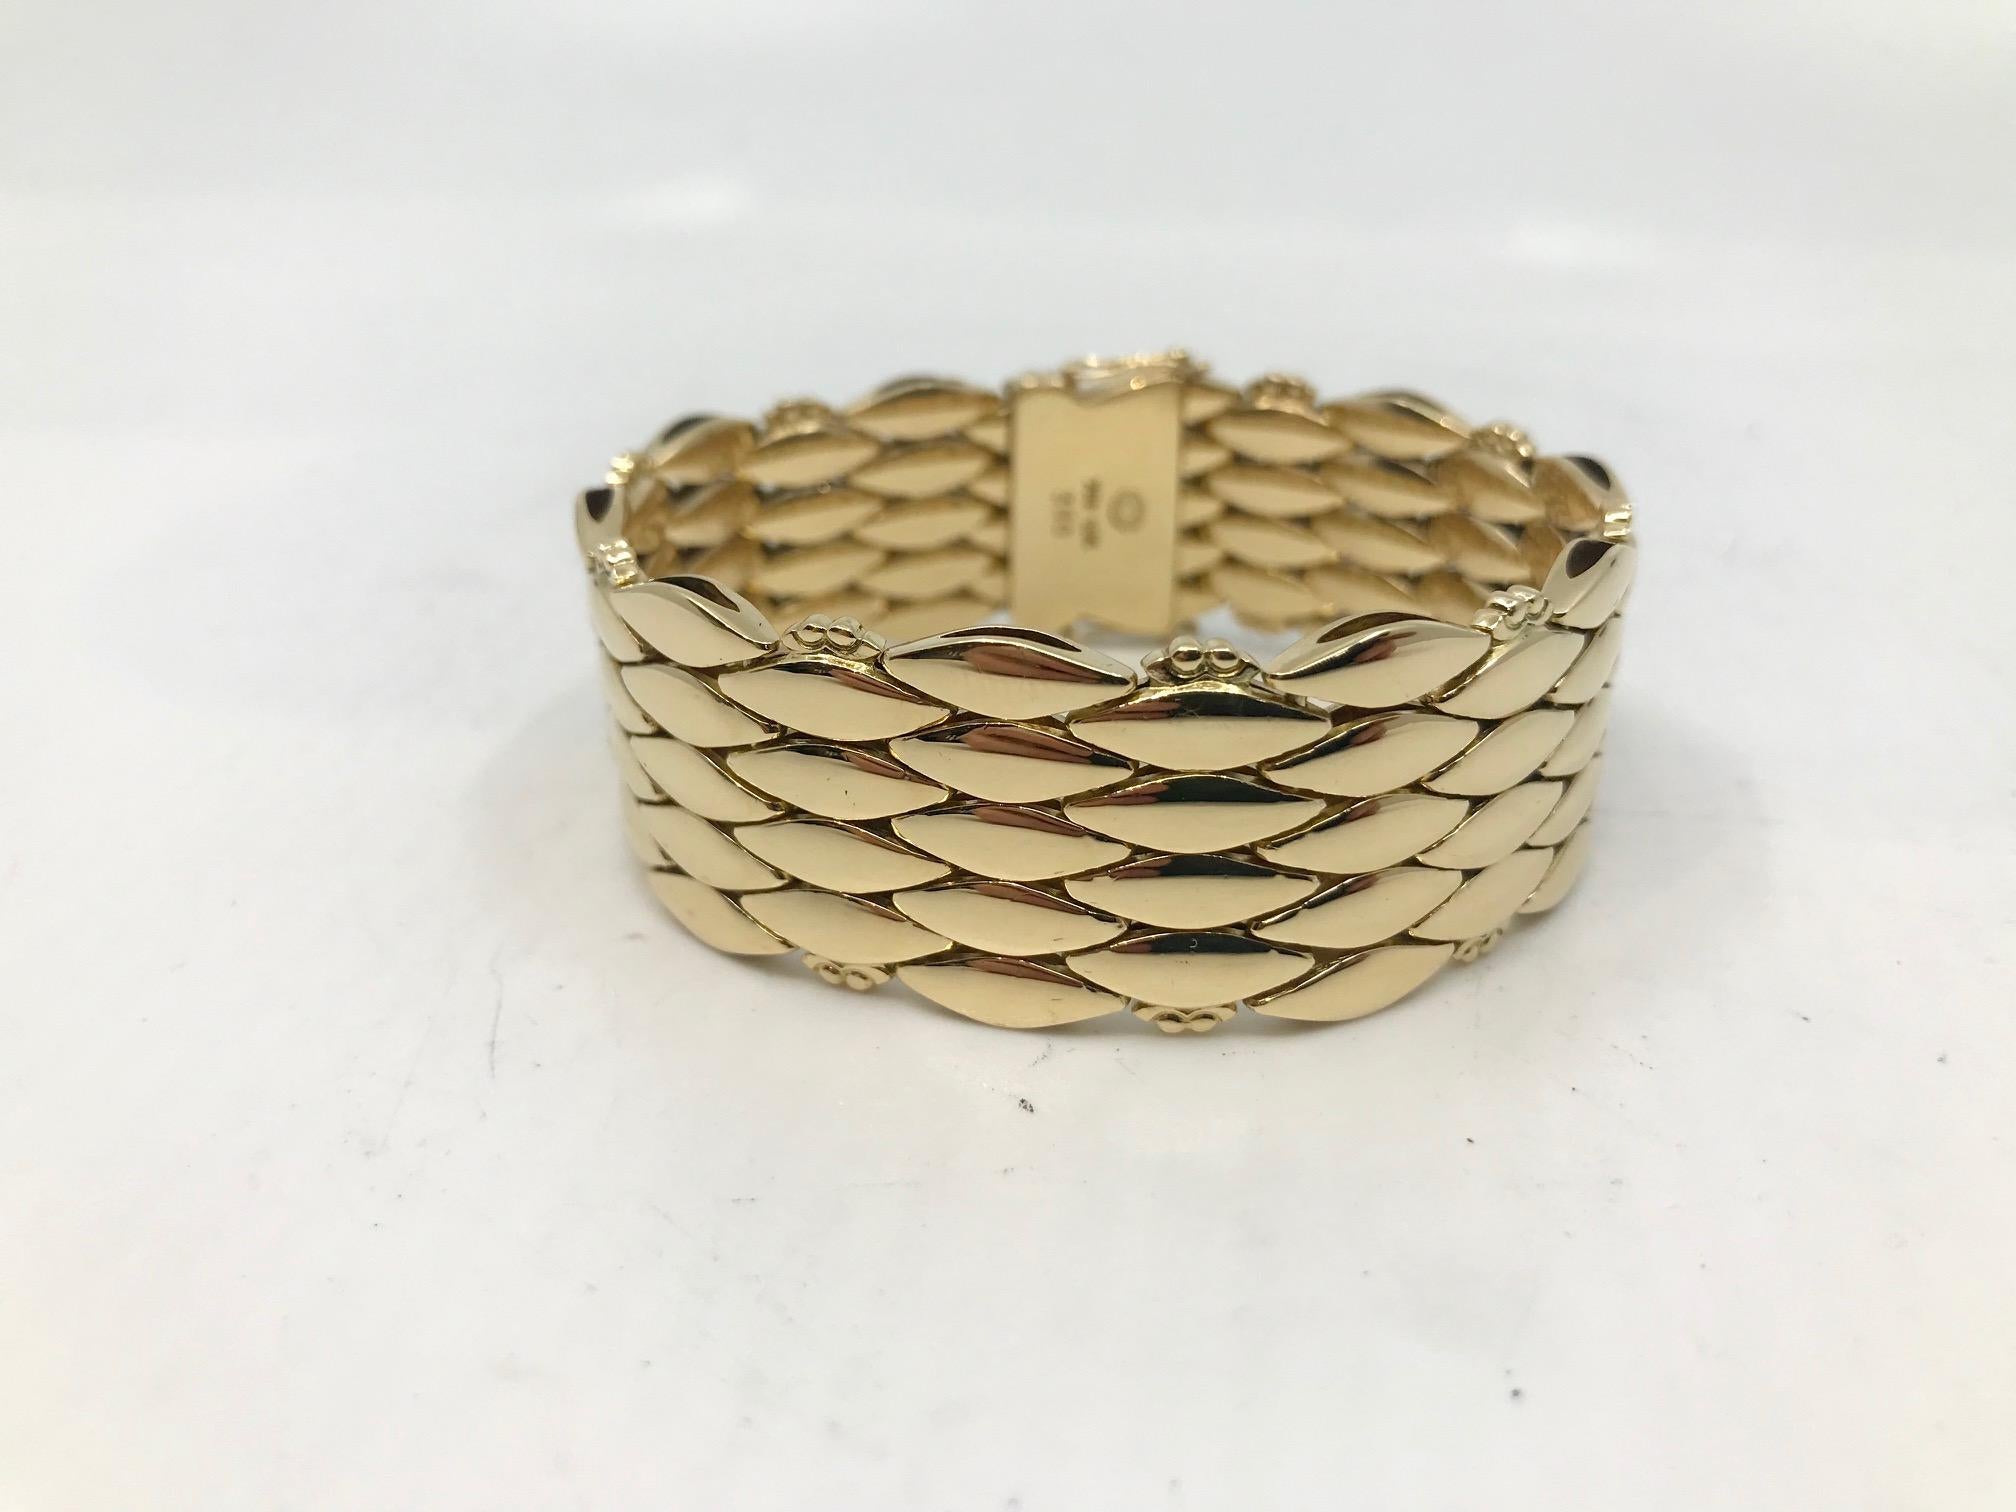 This is a wide version Georg Jensen 18 Kt gold bracelet, design 350 by Harald Nielsen in the early 1940s.
Measures 7½